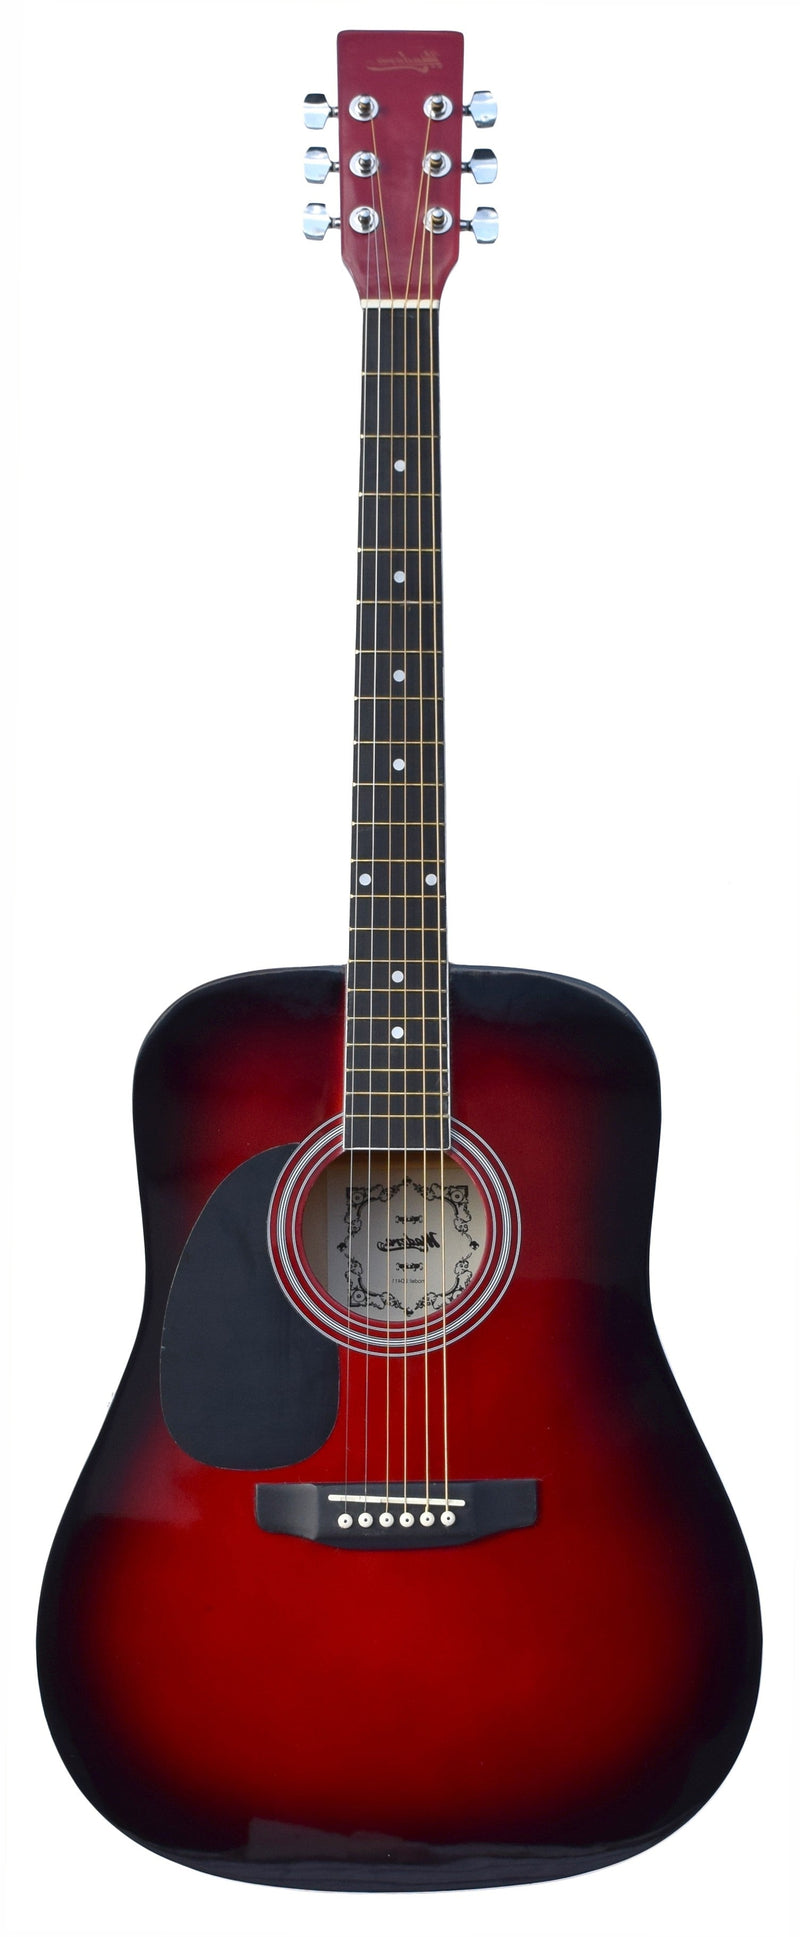 Madera LD411-LH Acoustic Full Size Left Handed Guitar Red Burst Madera Instrument for sale canada